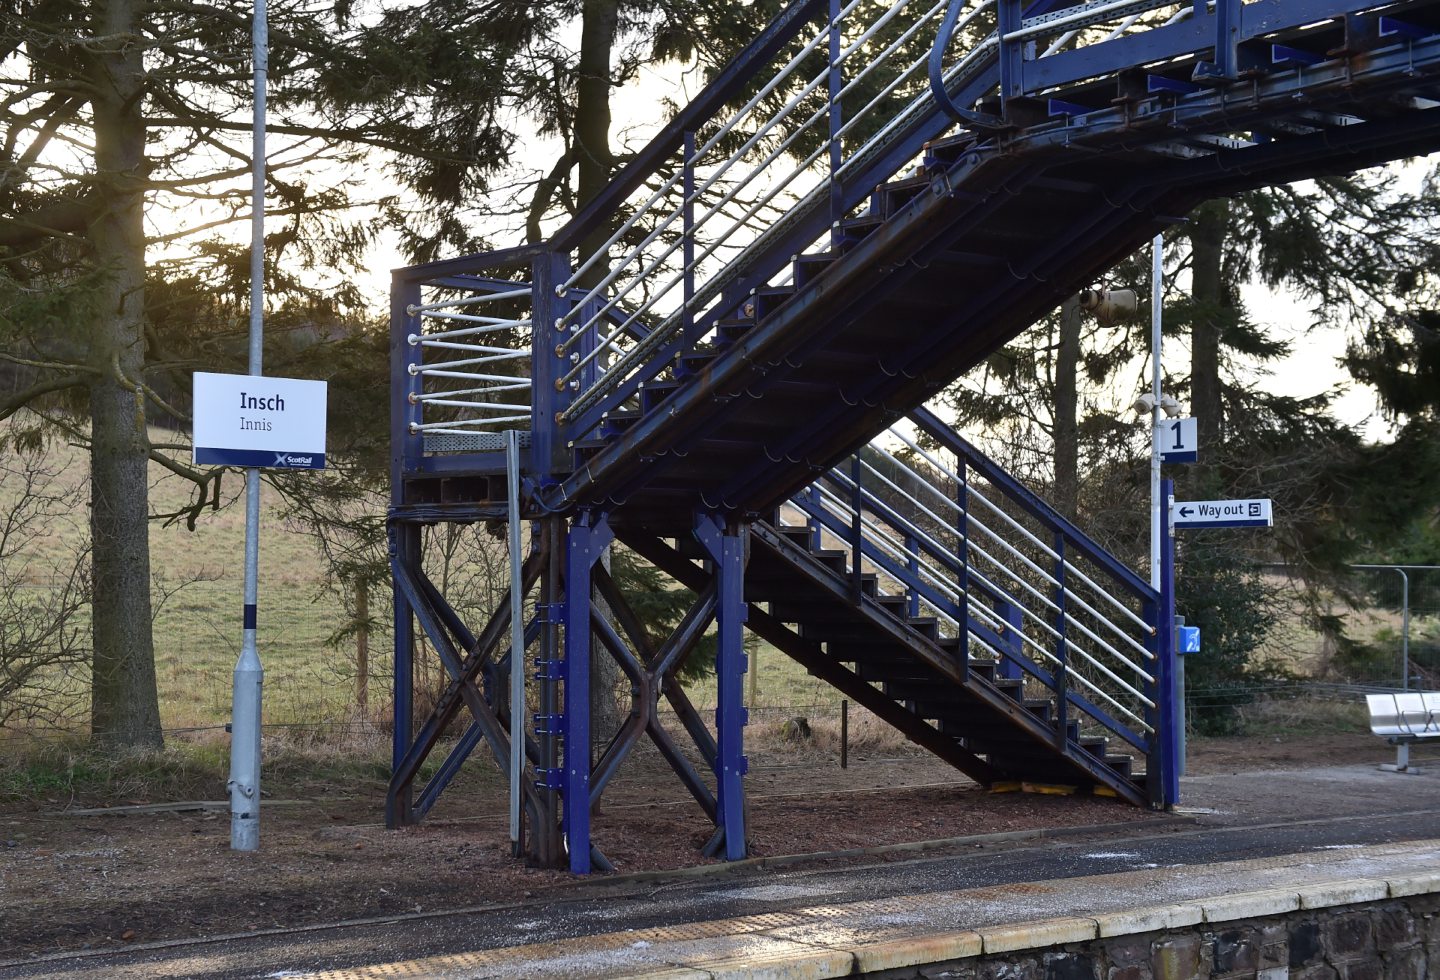 The stairs at Insch railway station